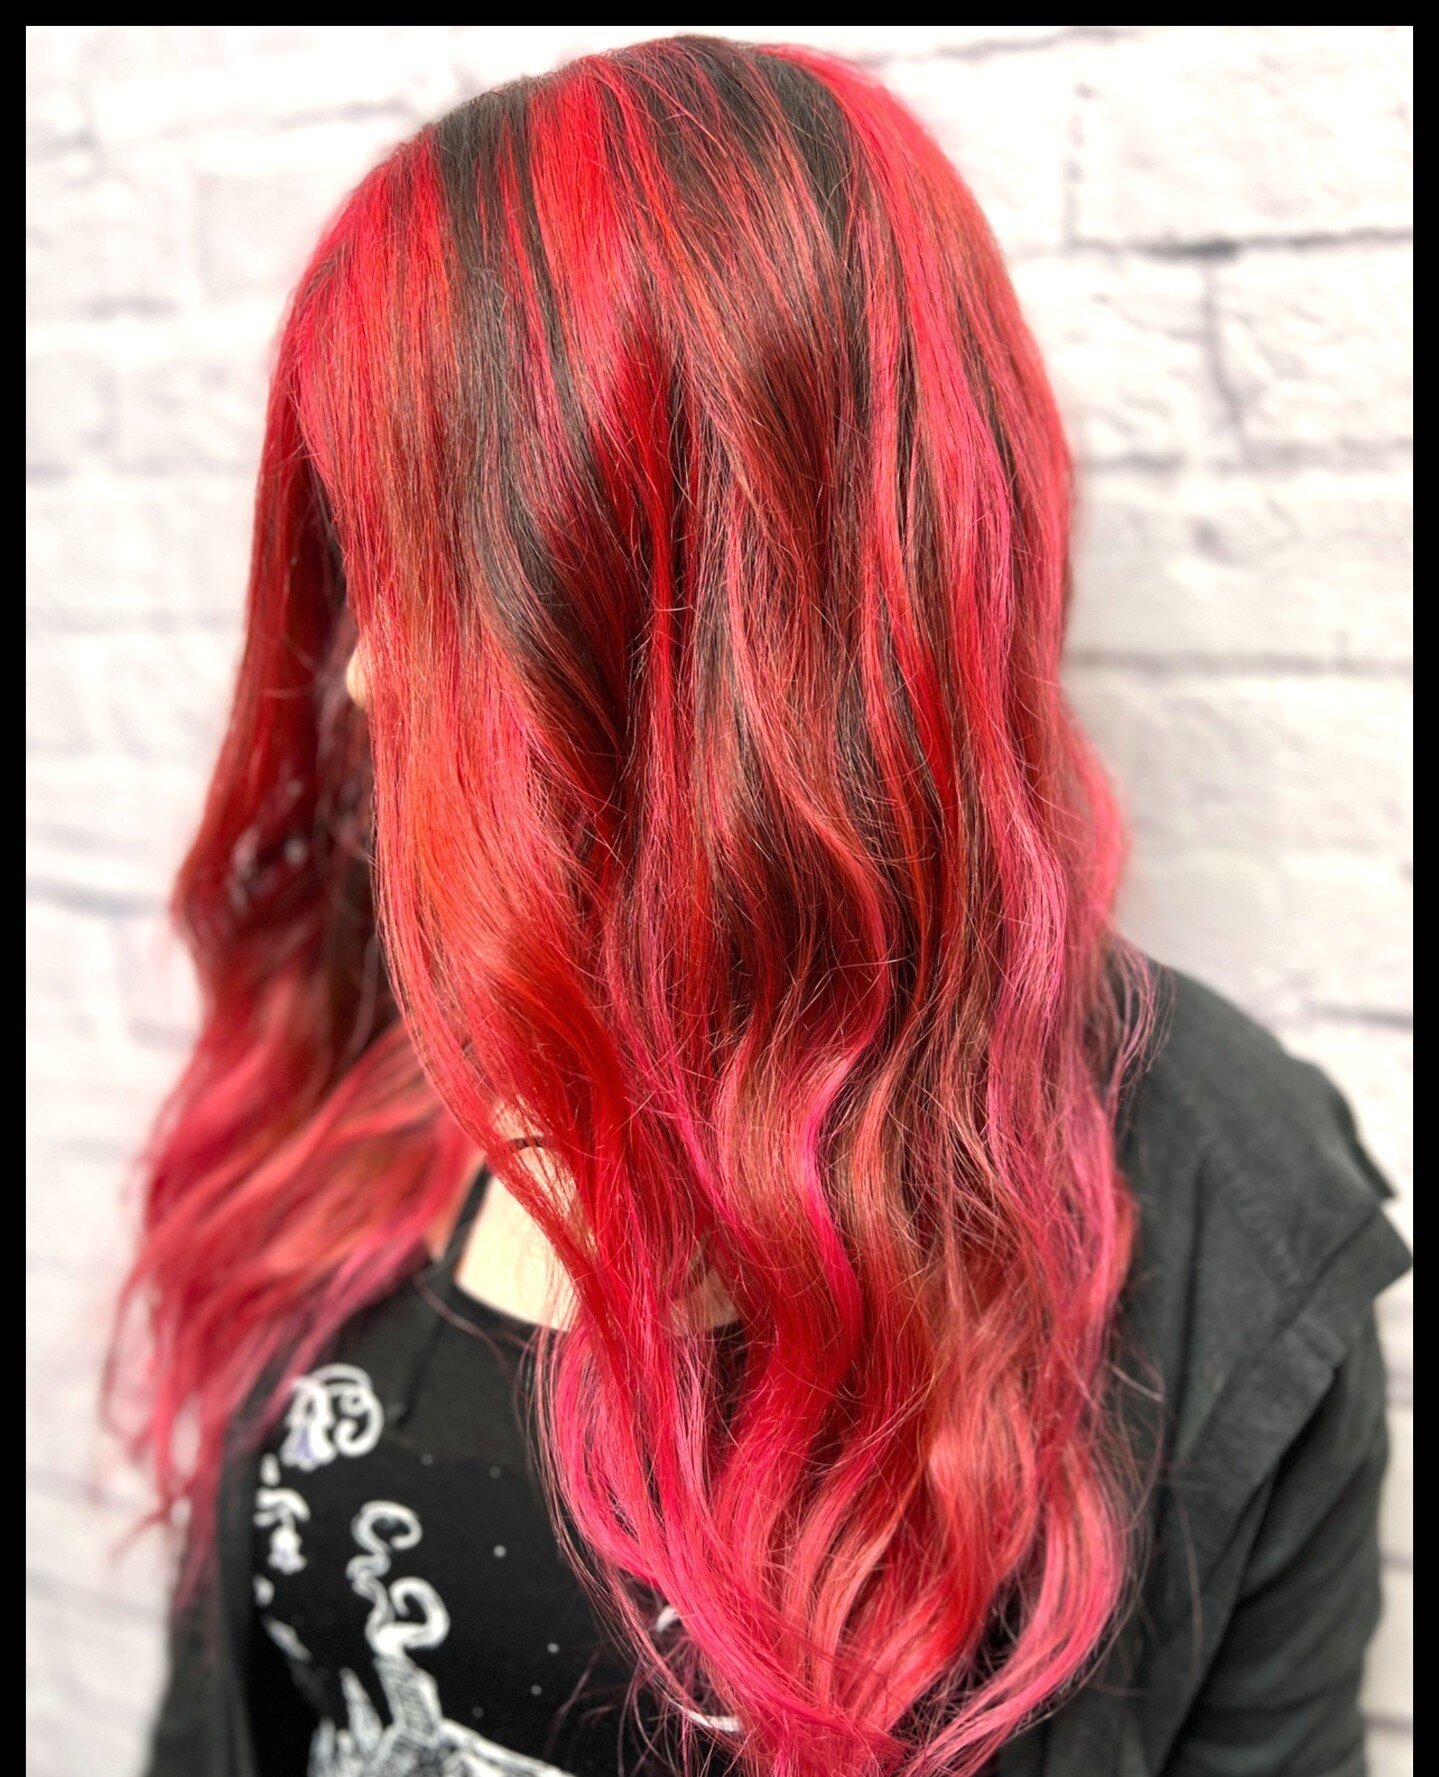 Tiger eye vibes with this fiery creative color!⁠
.⁠
Stylist: Donna ⁠